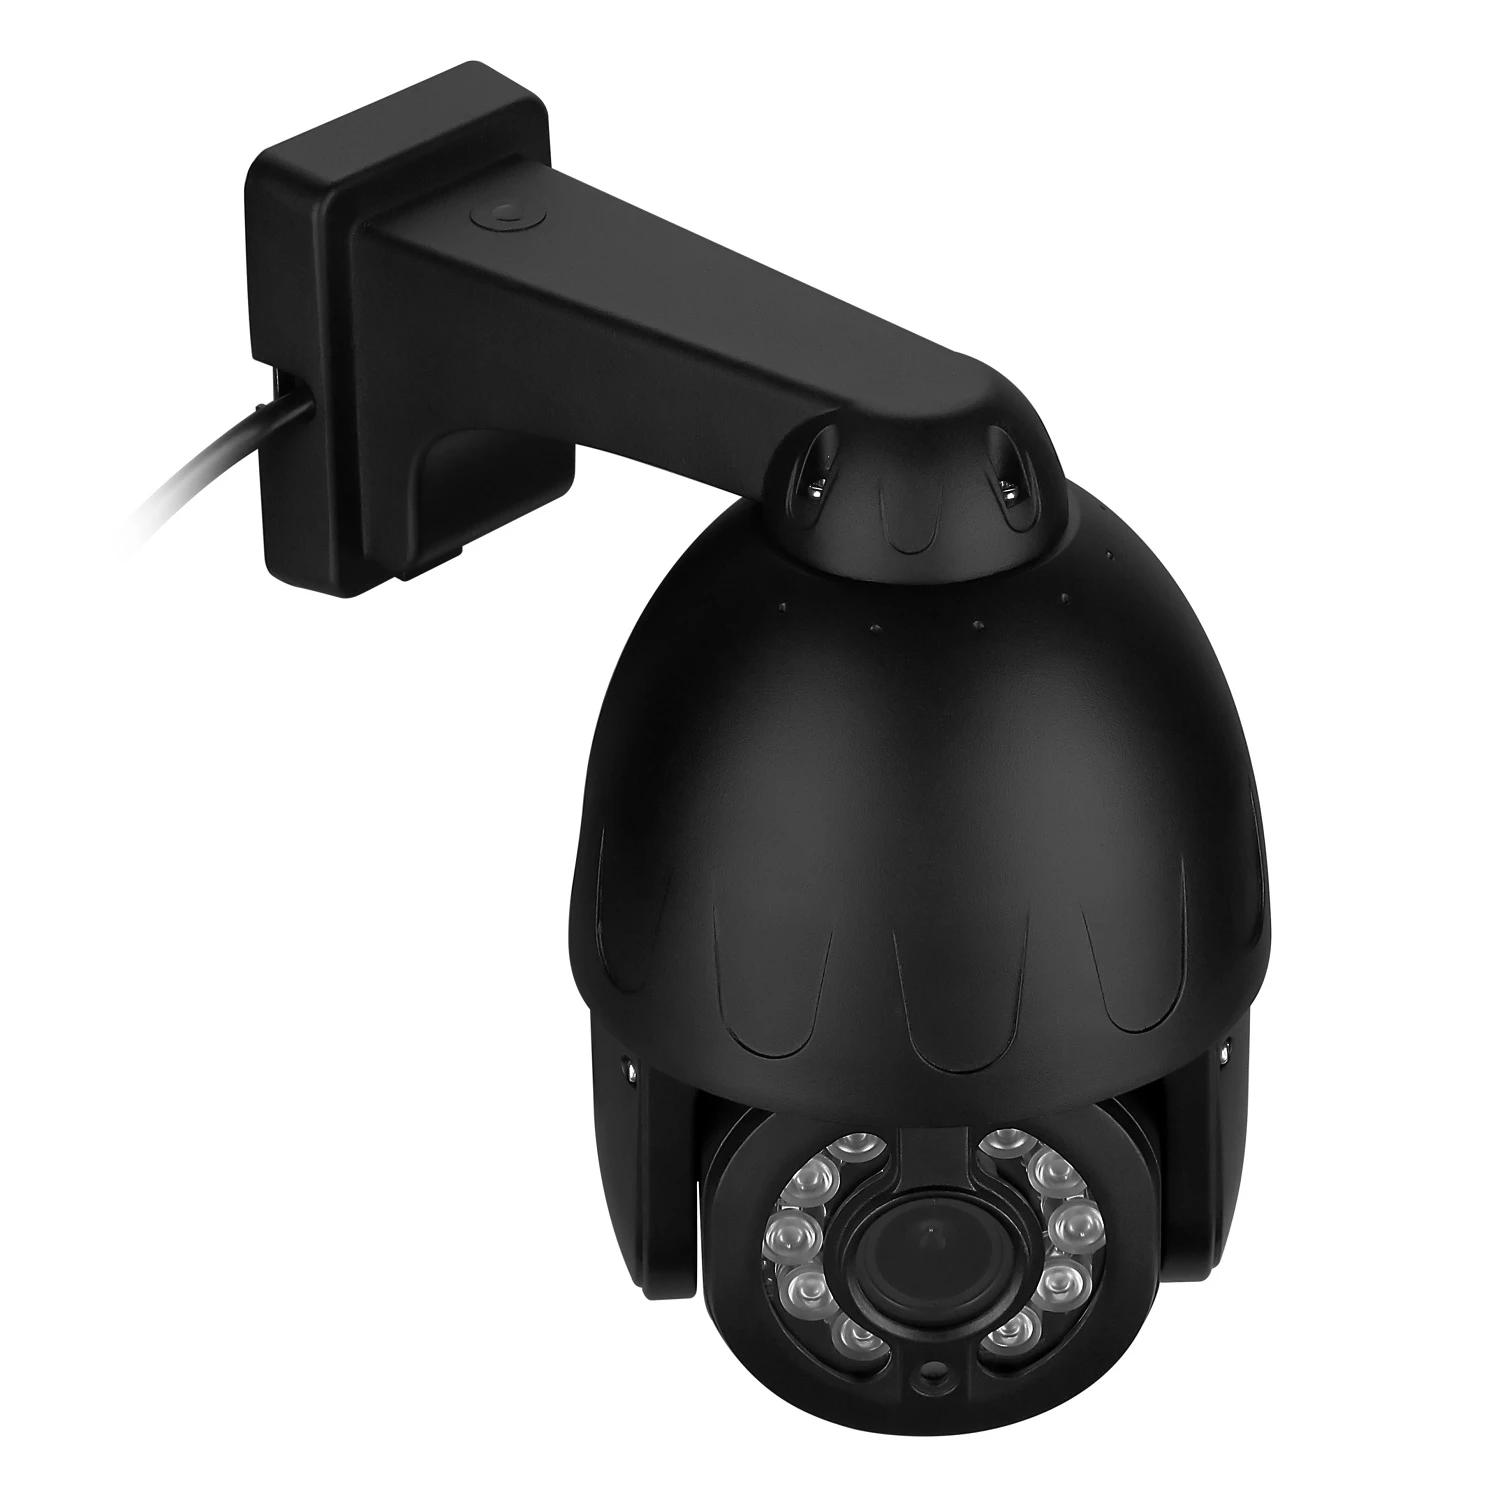 2MP 5MP 5X Optical Zoom PTZ Waterproof Outdoor Dome Wifi IP Wireless Smart Security CCTV Camera 8MP